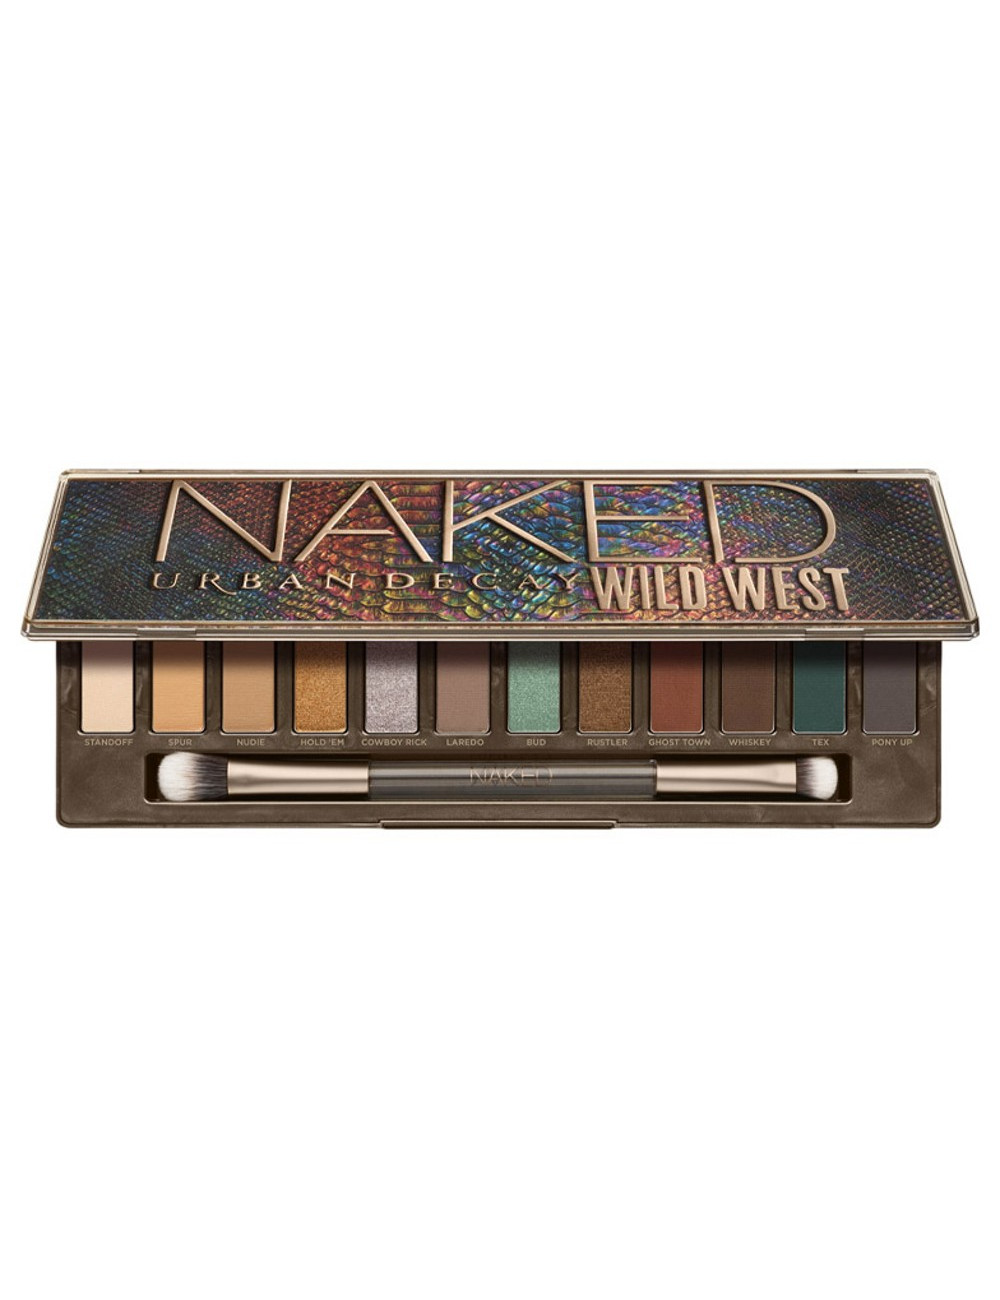 Urban Decay Naked Wild West...